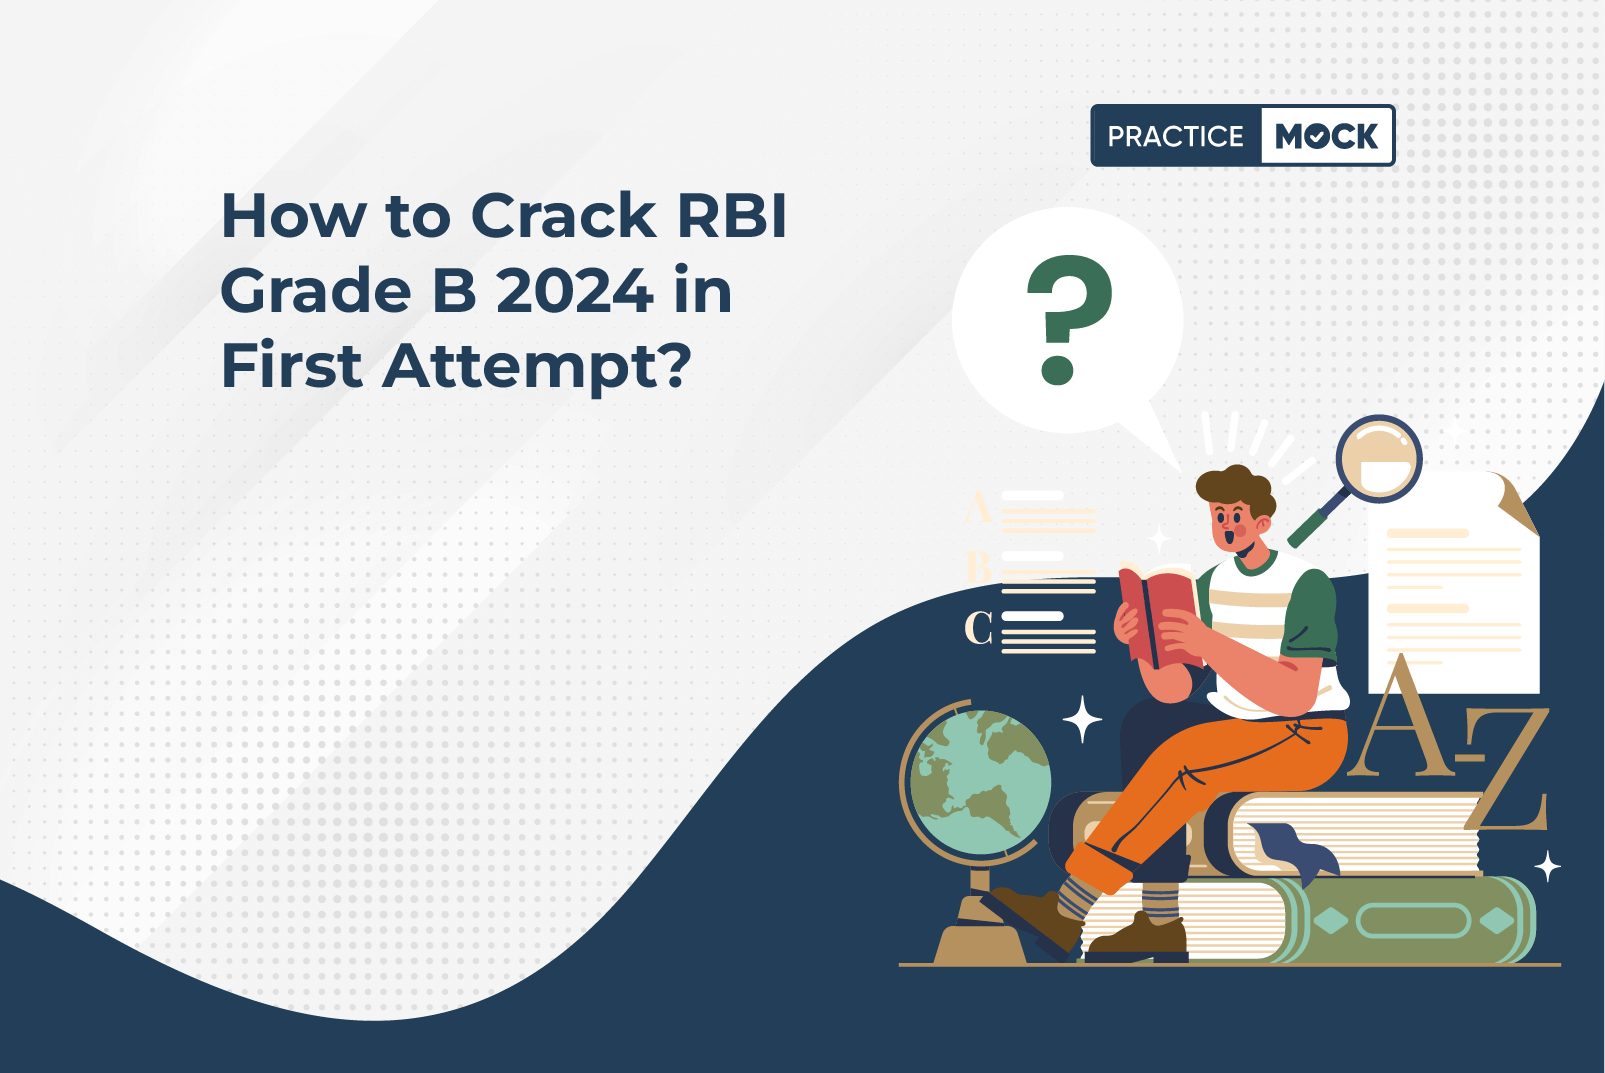 How to Crack RBI Grade B 2024 in First Attempt